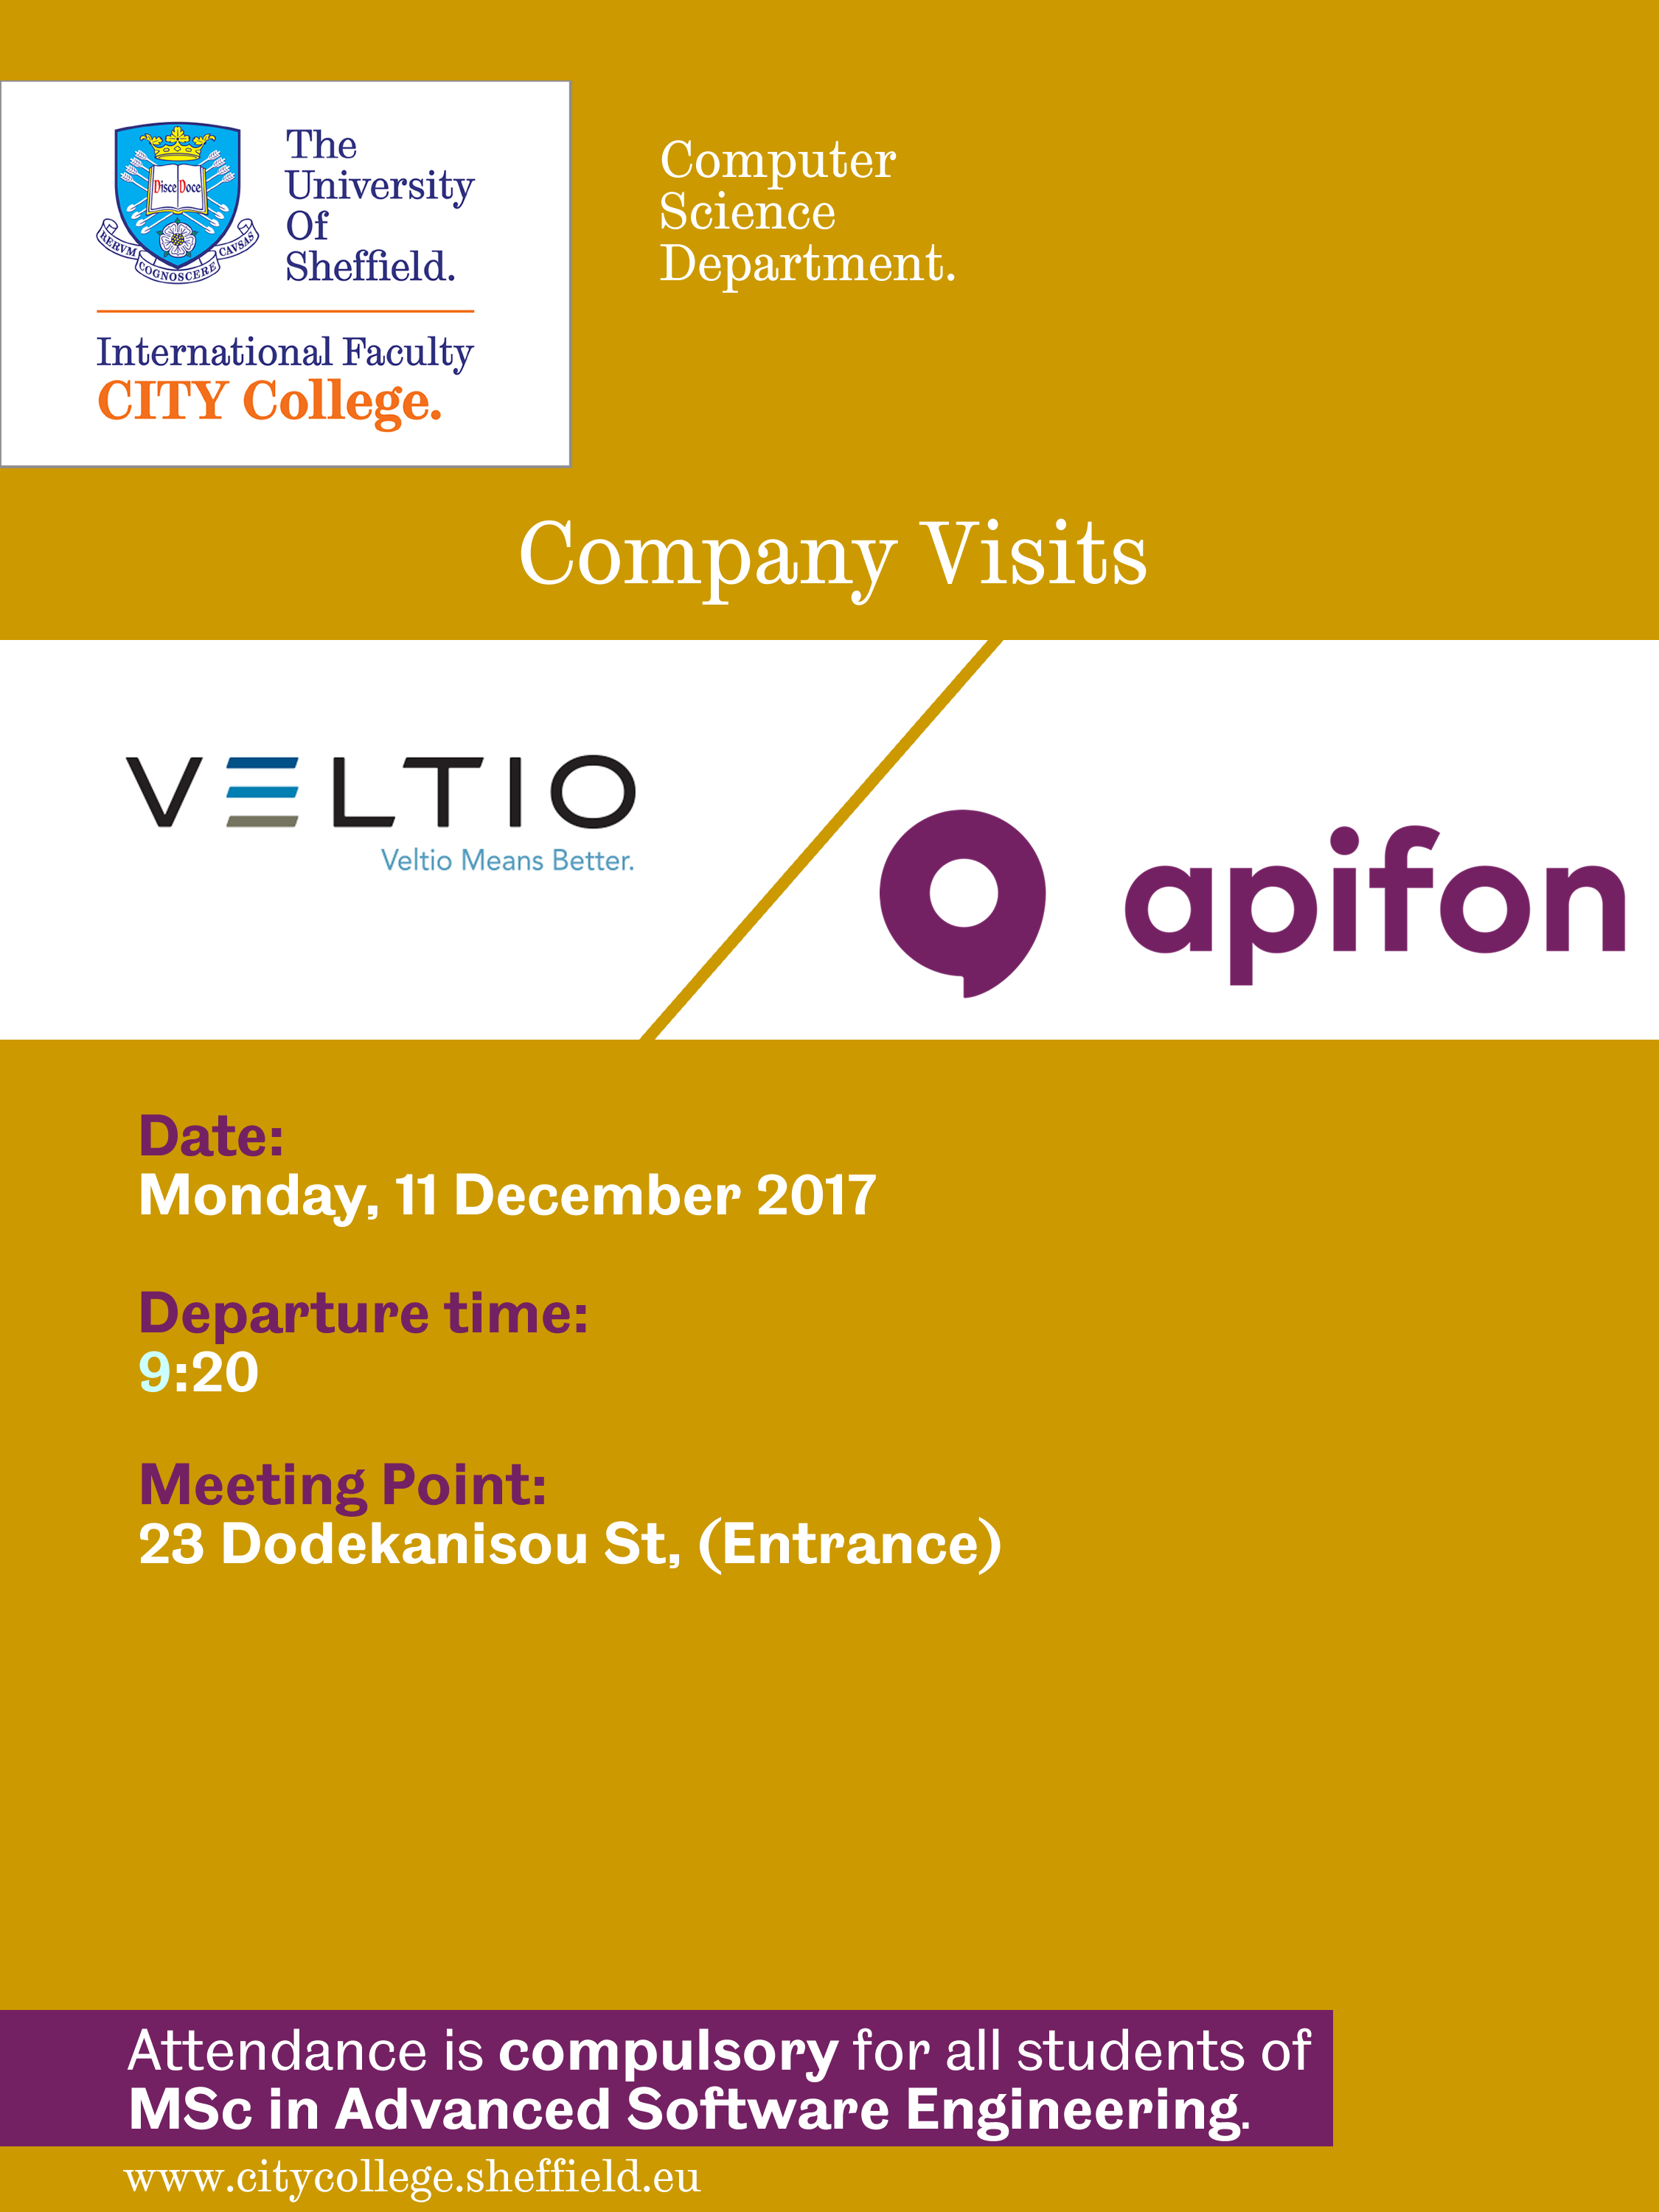 Company Visit to Veltio and Apifon by the International Faculty CITY College Computer Science students